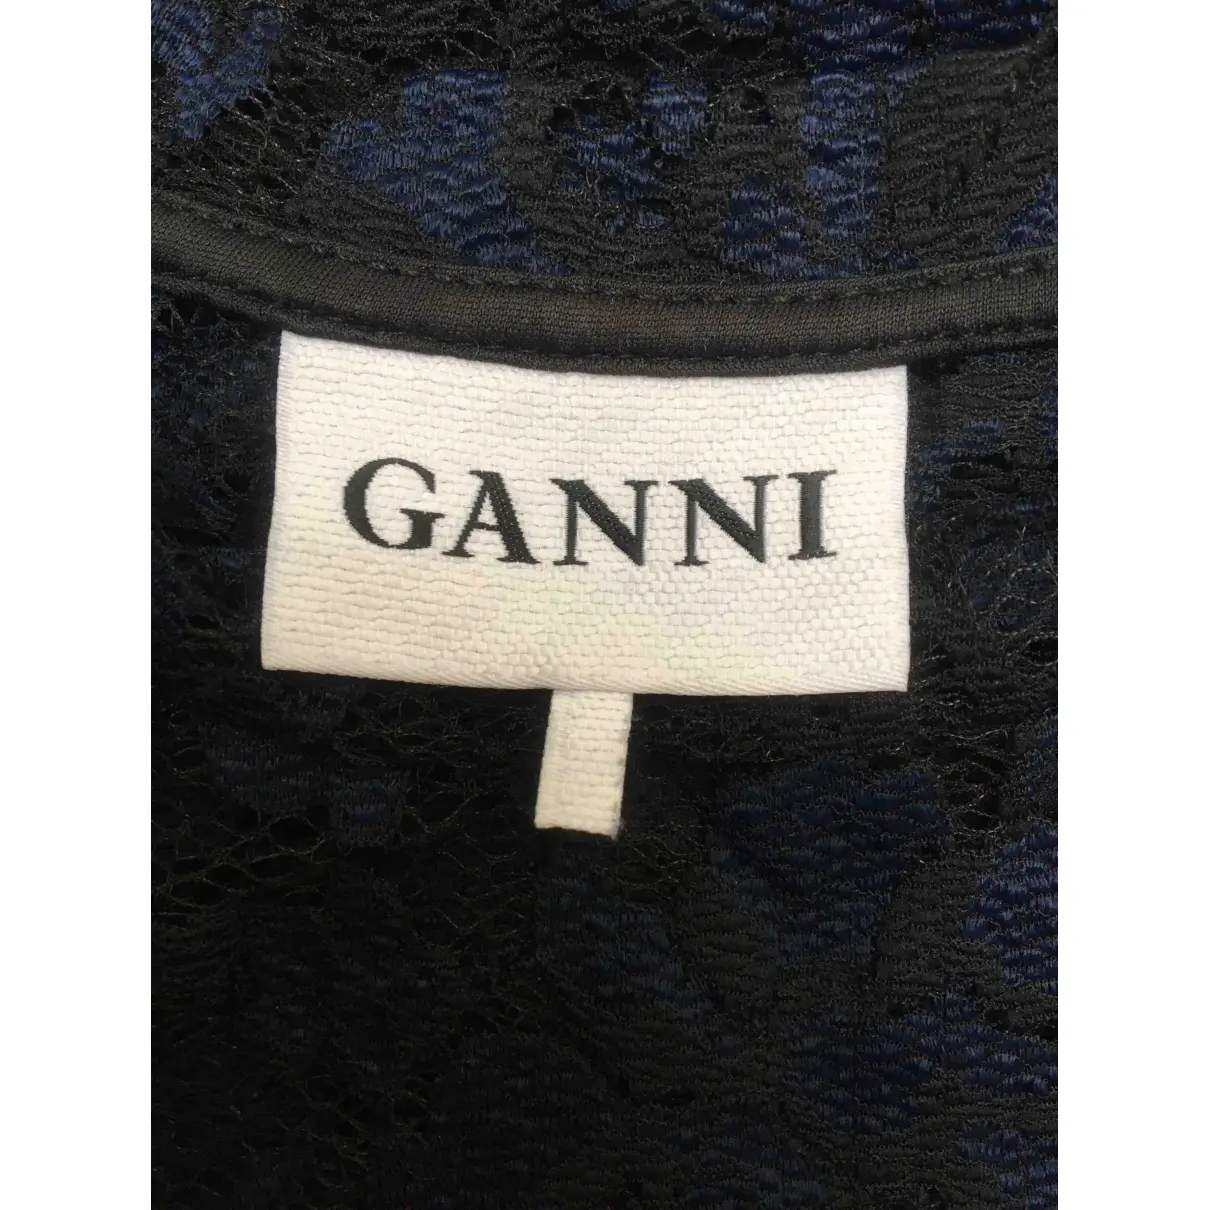 Spring Summer 2020 lace top Ganni